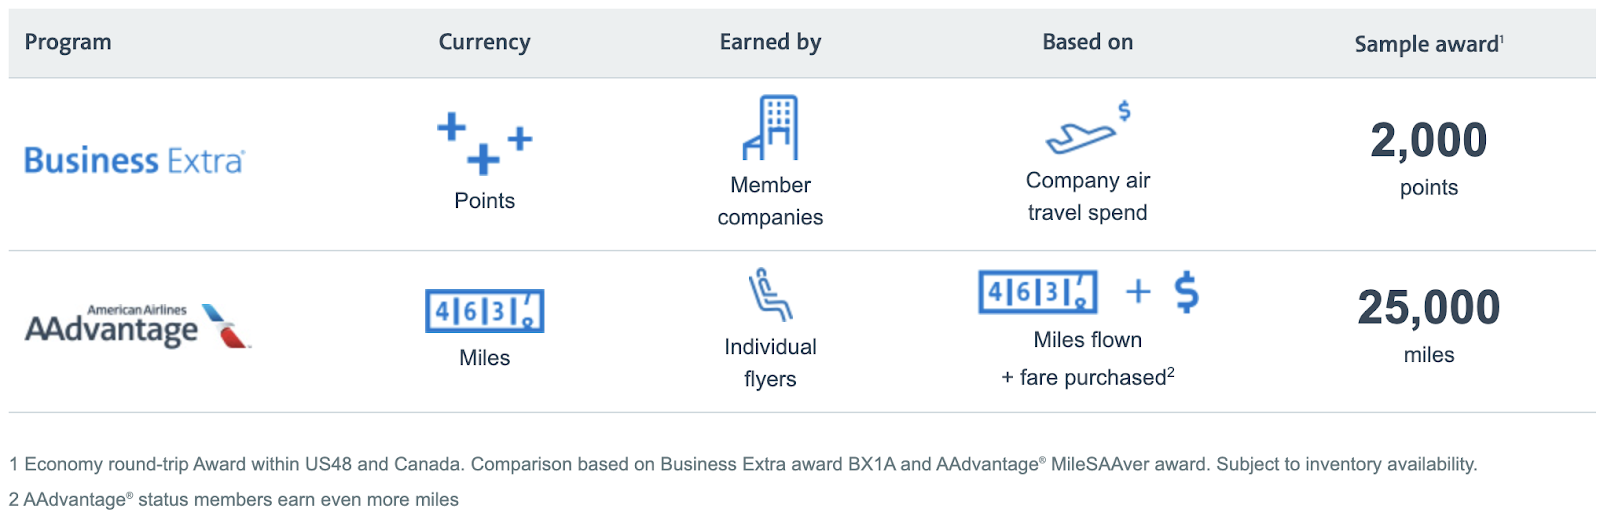 reward points earned through Business Extra